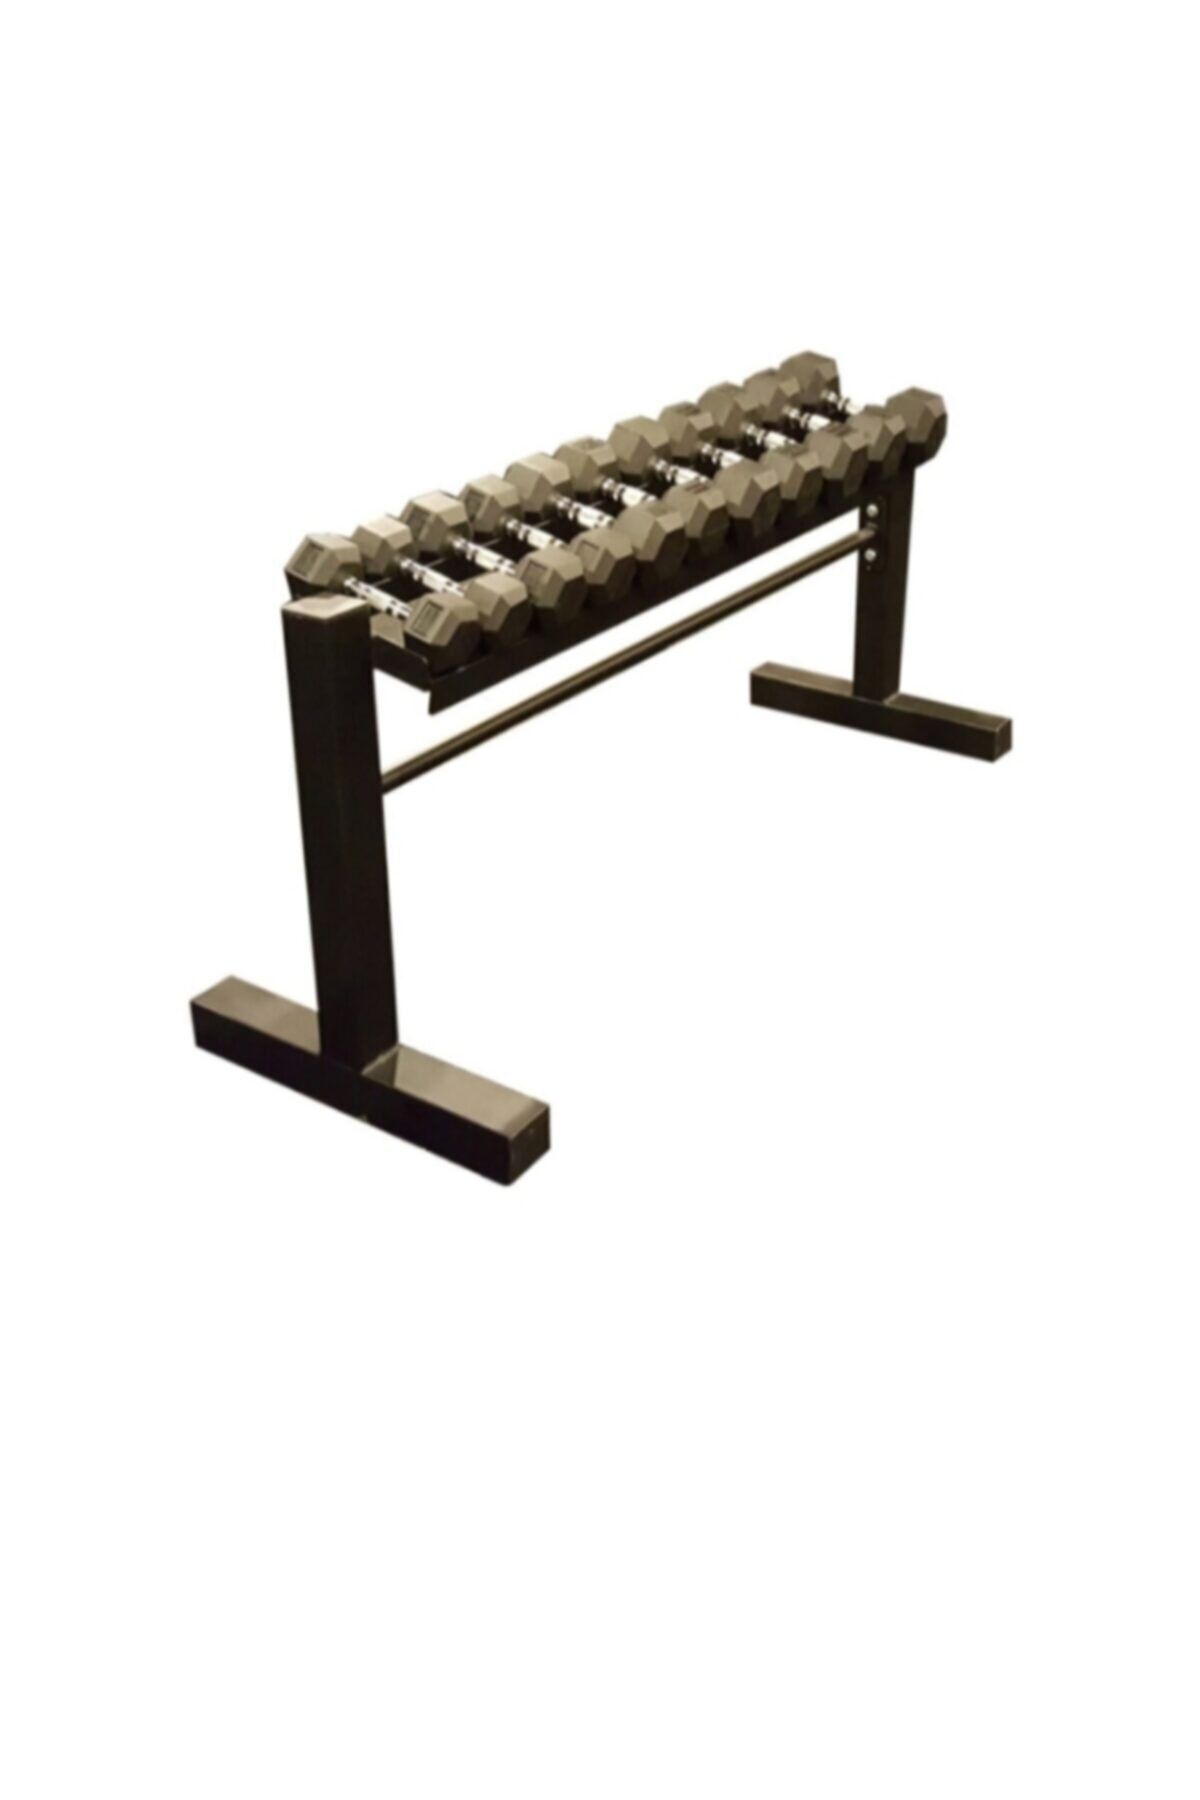 PROBLACK Dumbell Stand 100 Cm